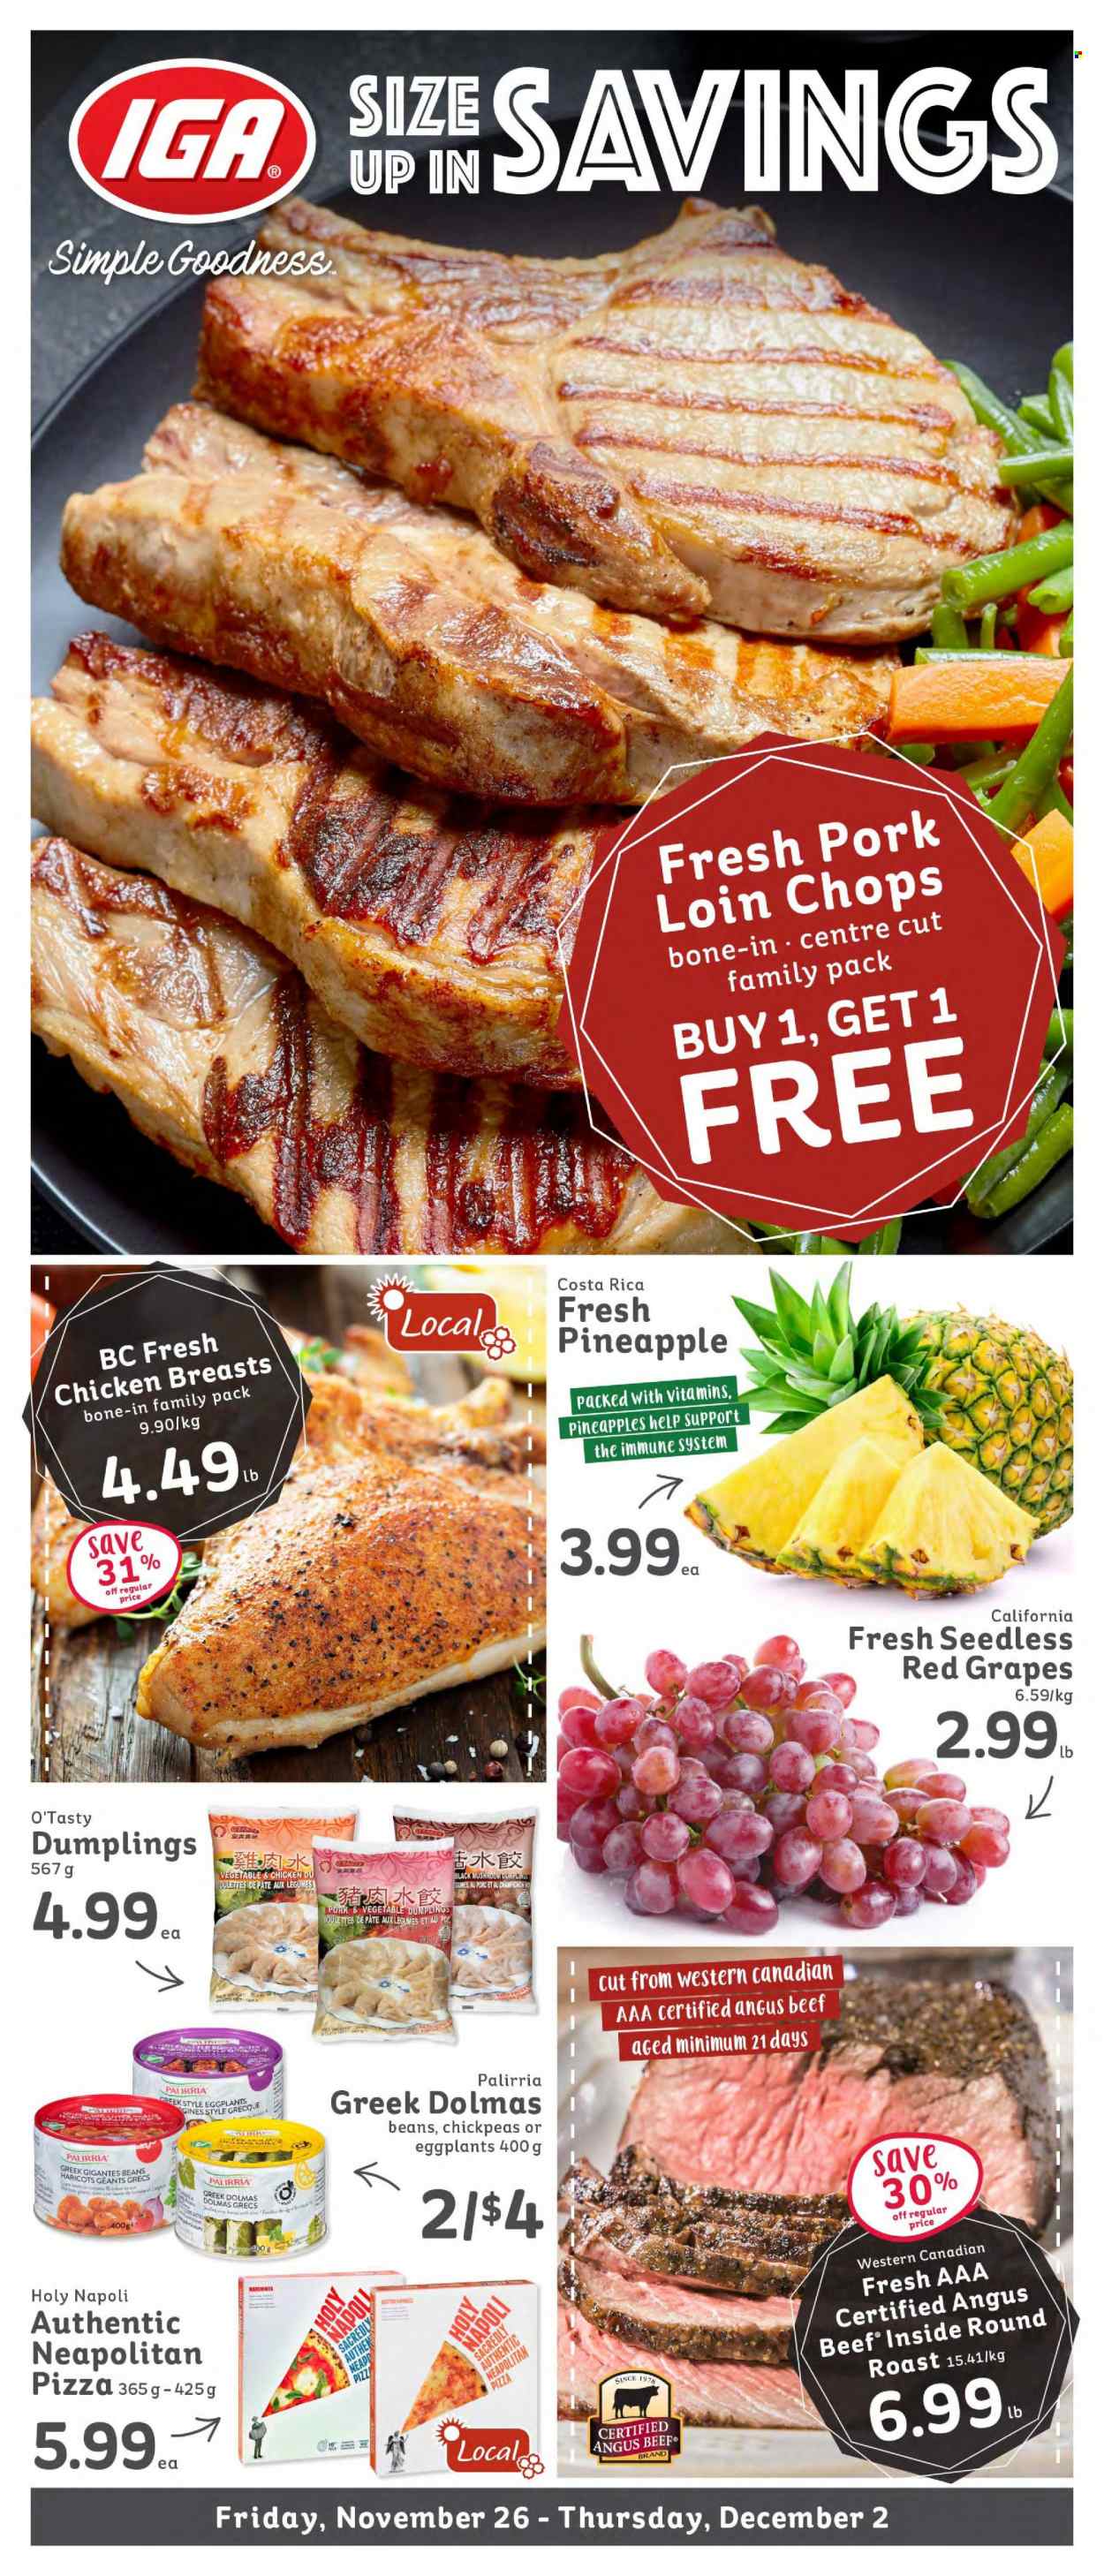 thumbnail - IGA Simple Goodness Flyer - November 26, 2021 - December 02, 2021 - Sales products - eggplant, grapes, pineapple, pizza, sauce, dumplings, chickpeas, chicken breasts, beef meat, round roast, pork chops, pork loin, pork meat. Page 1.